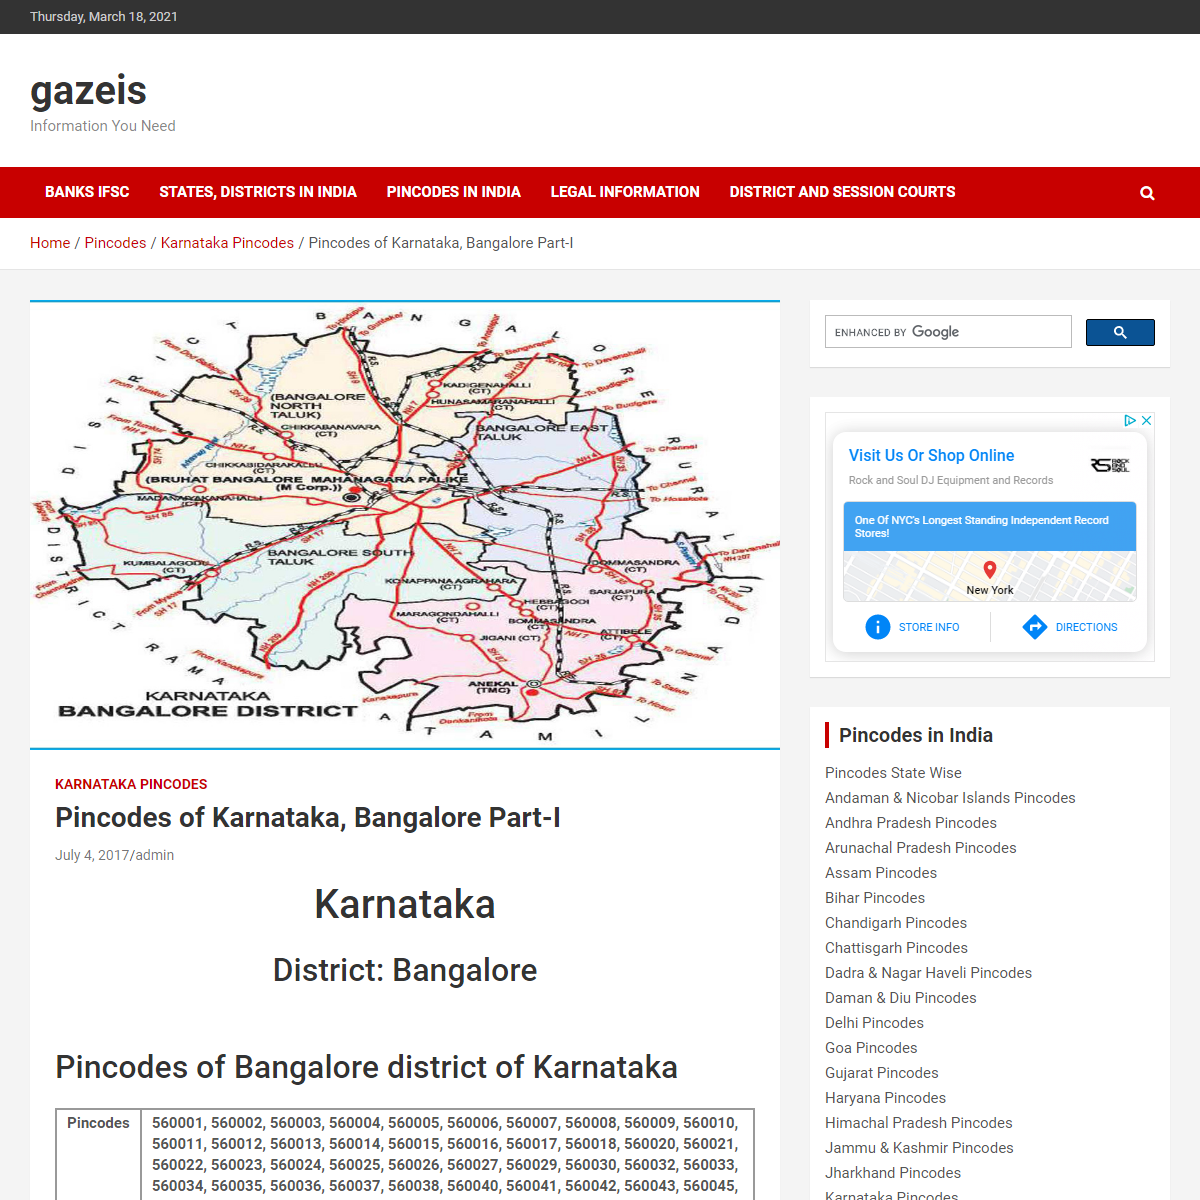 A complete backup of http://gazeis.in/pincodes-of-karnataka-bangalore-part-i/